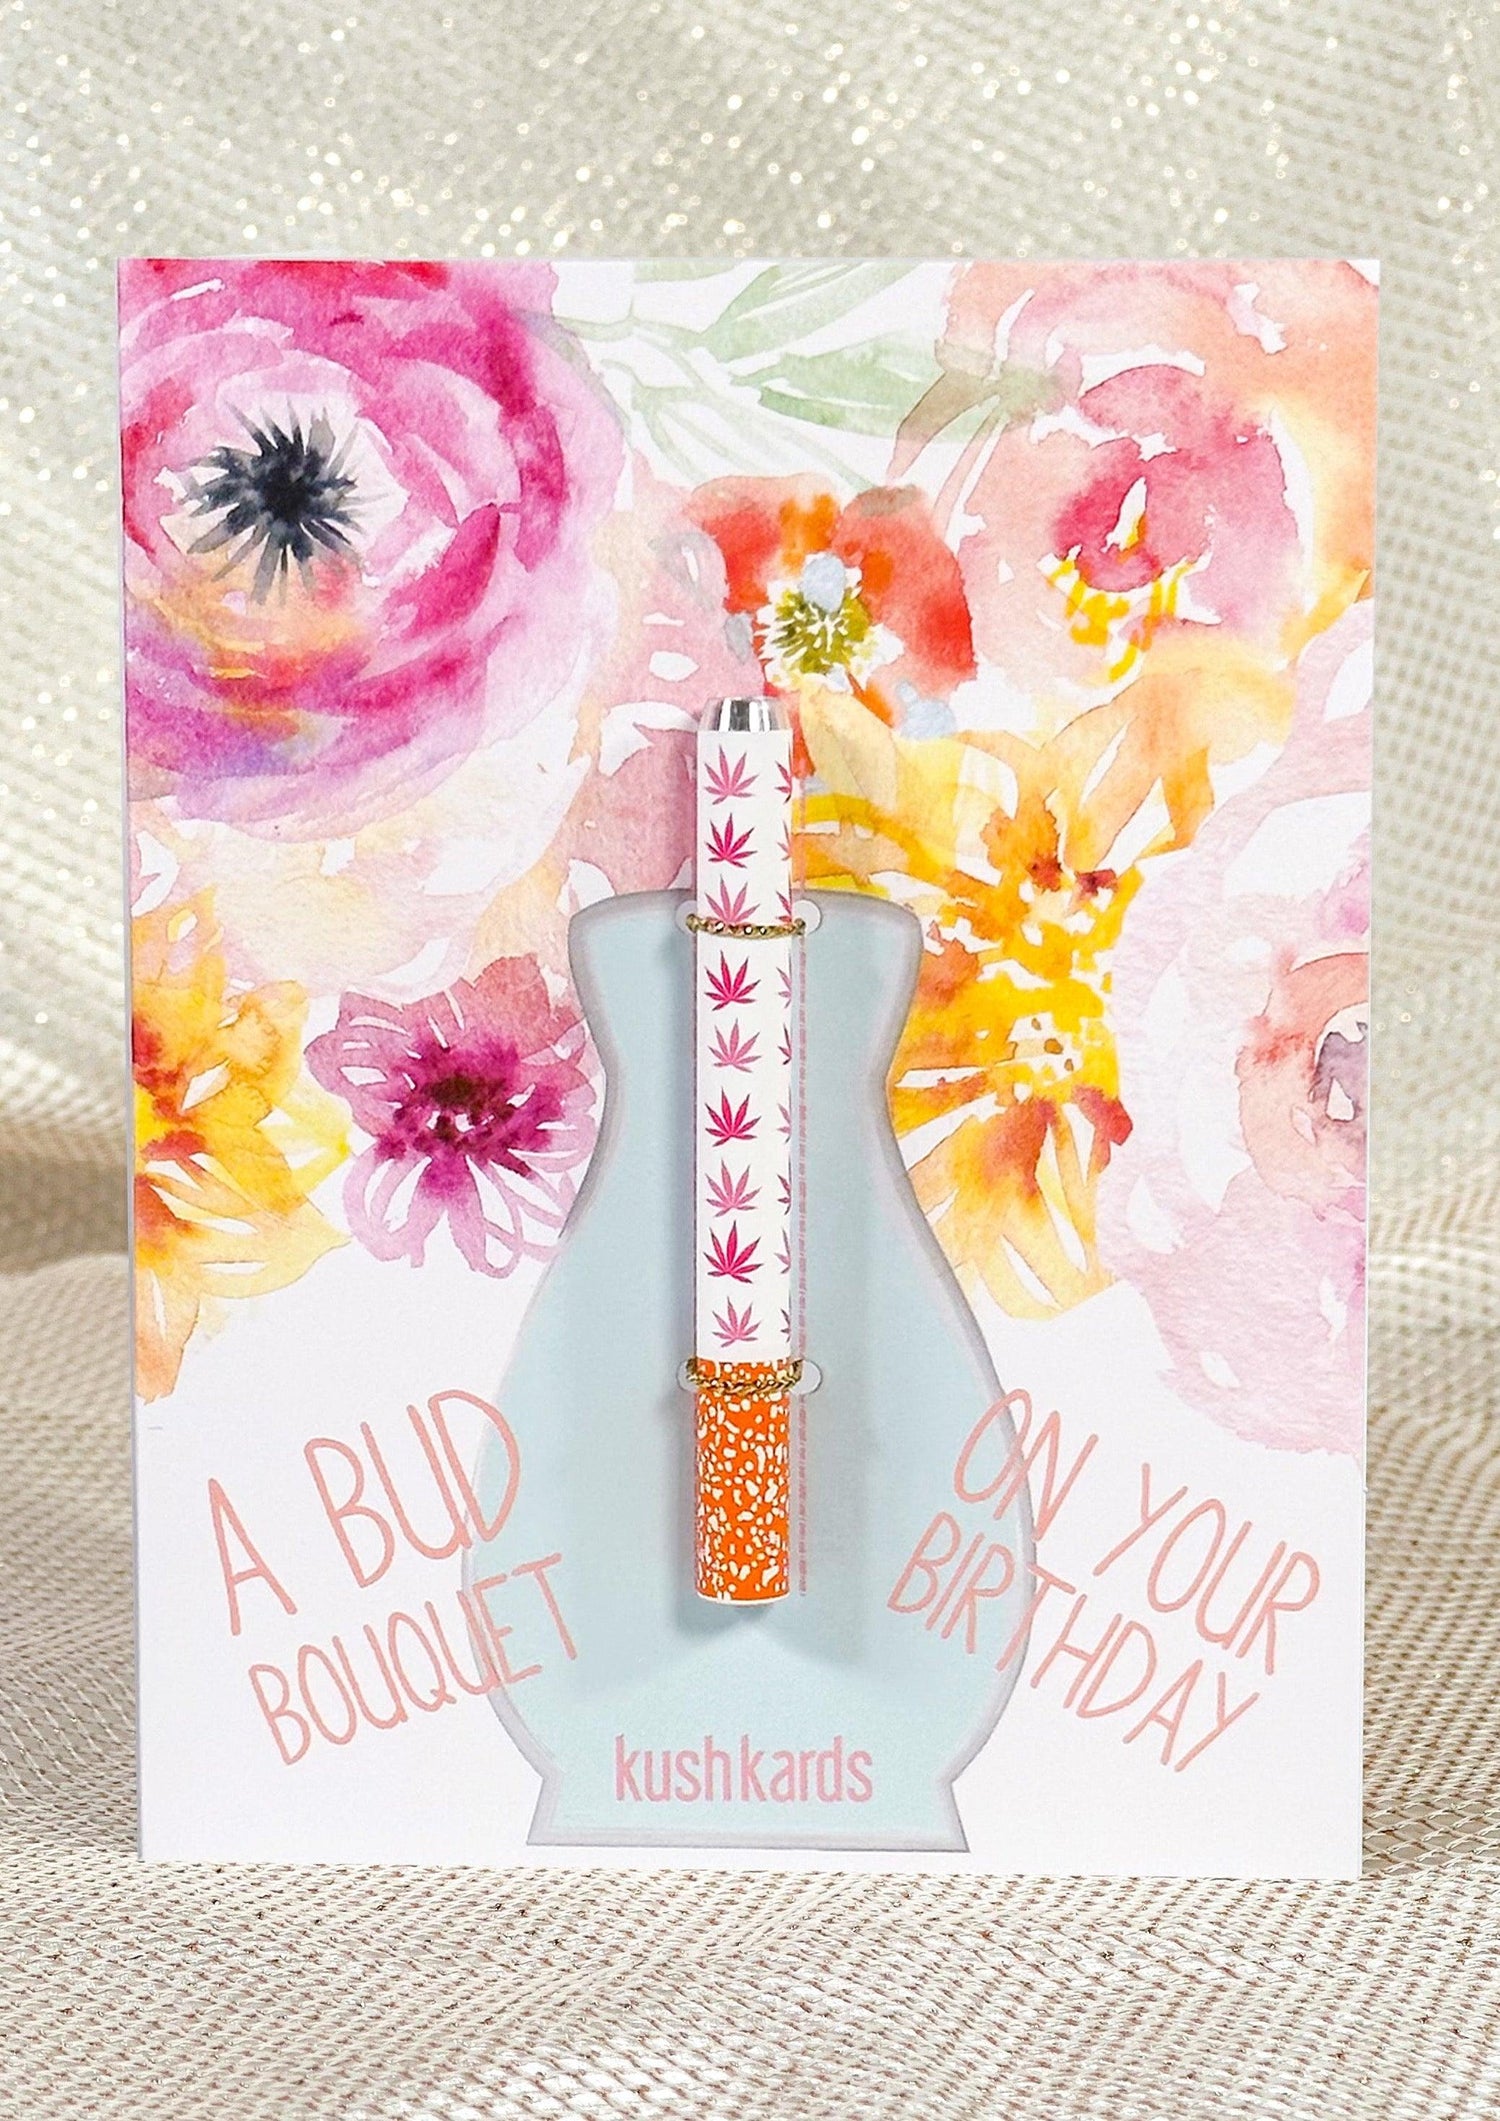 Bud Bouquet Birthday Card with optional one-hitter and floral design